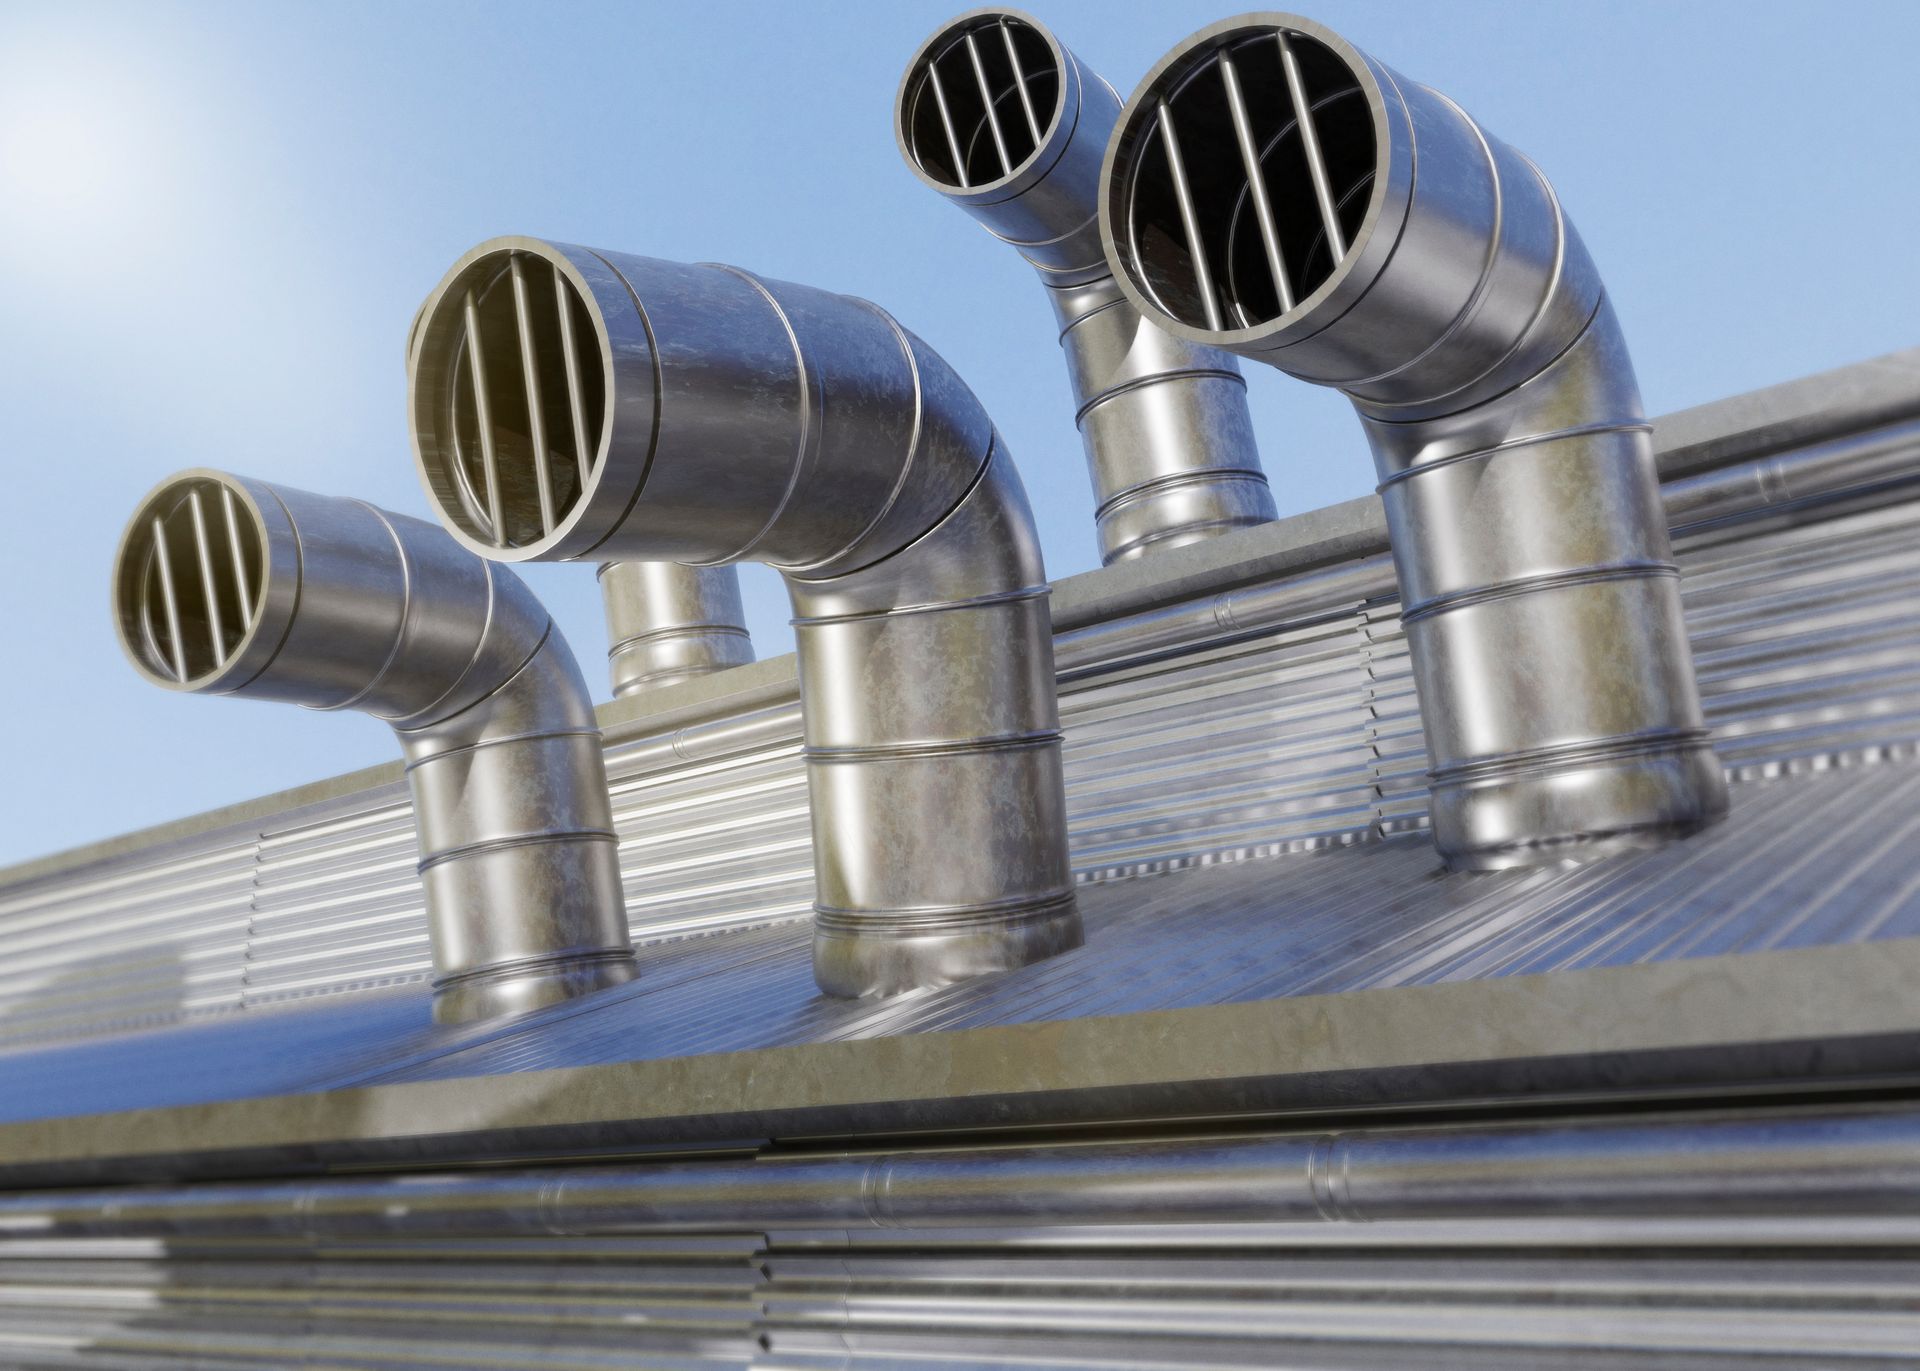 A row of metal pipes on the roof of a building